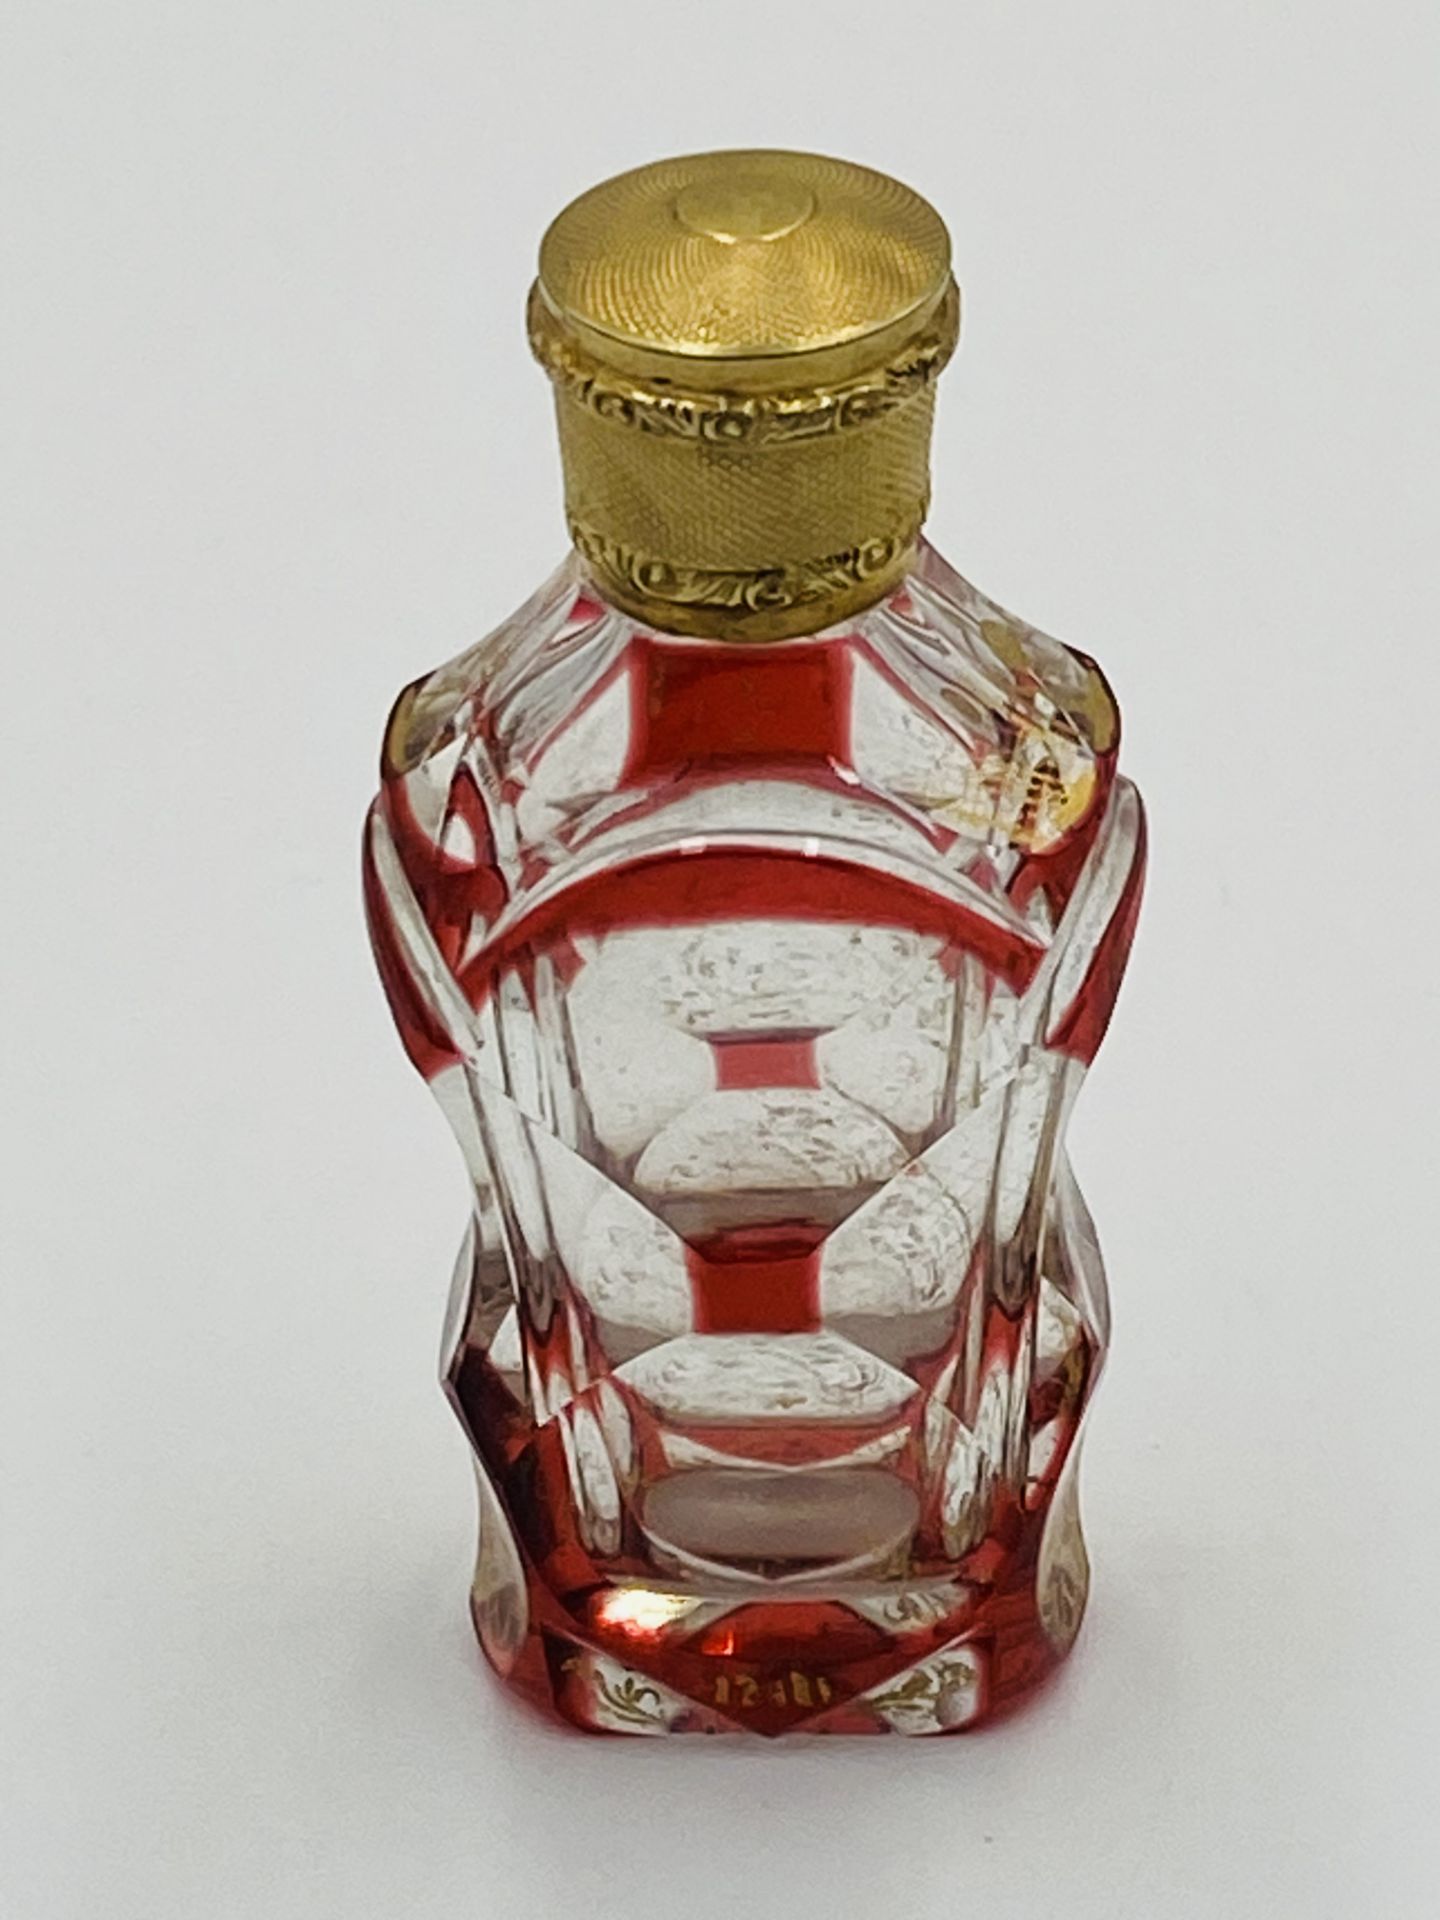 Three scent bottles with silver tops. - Image 3 of 5